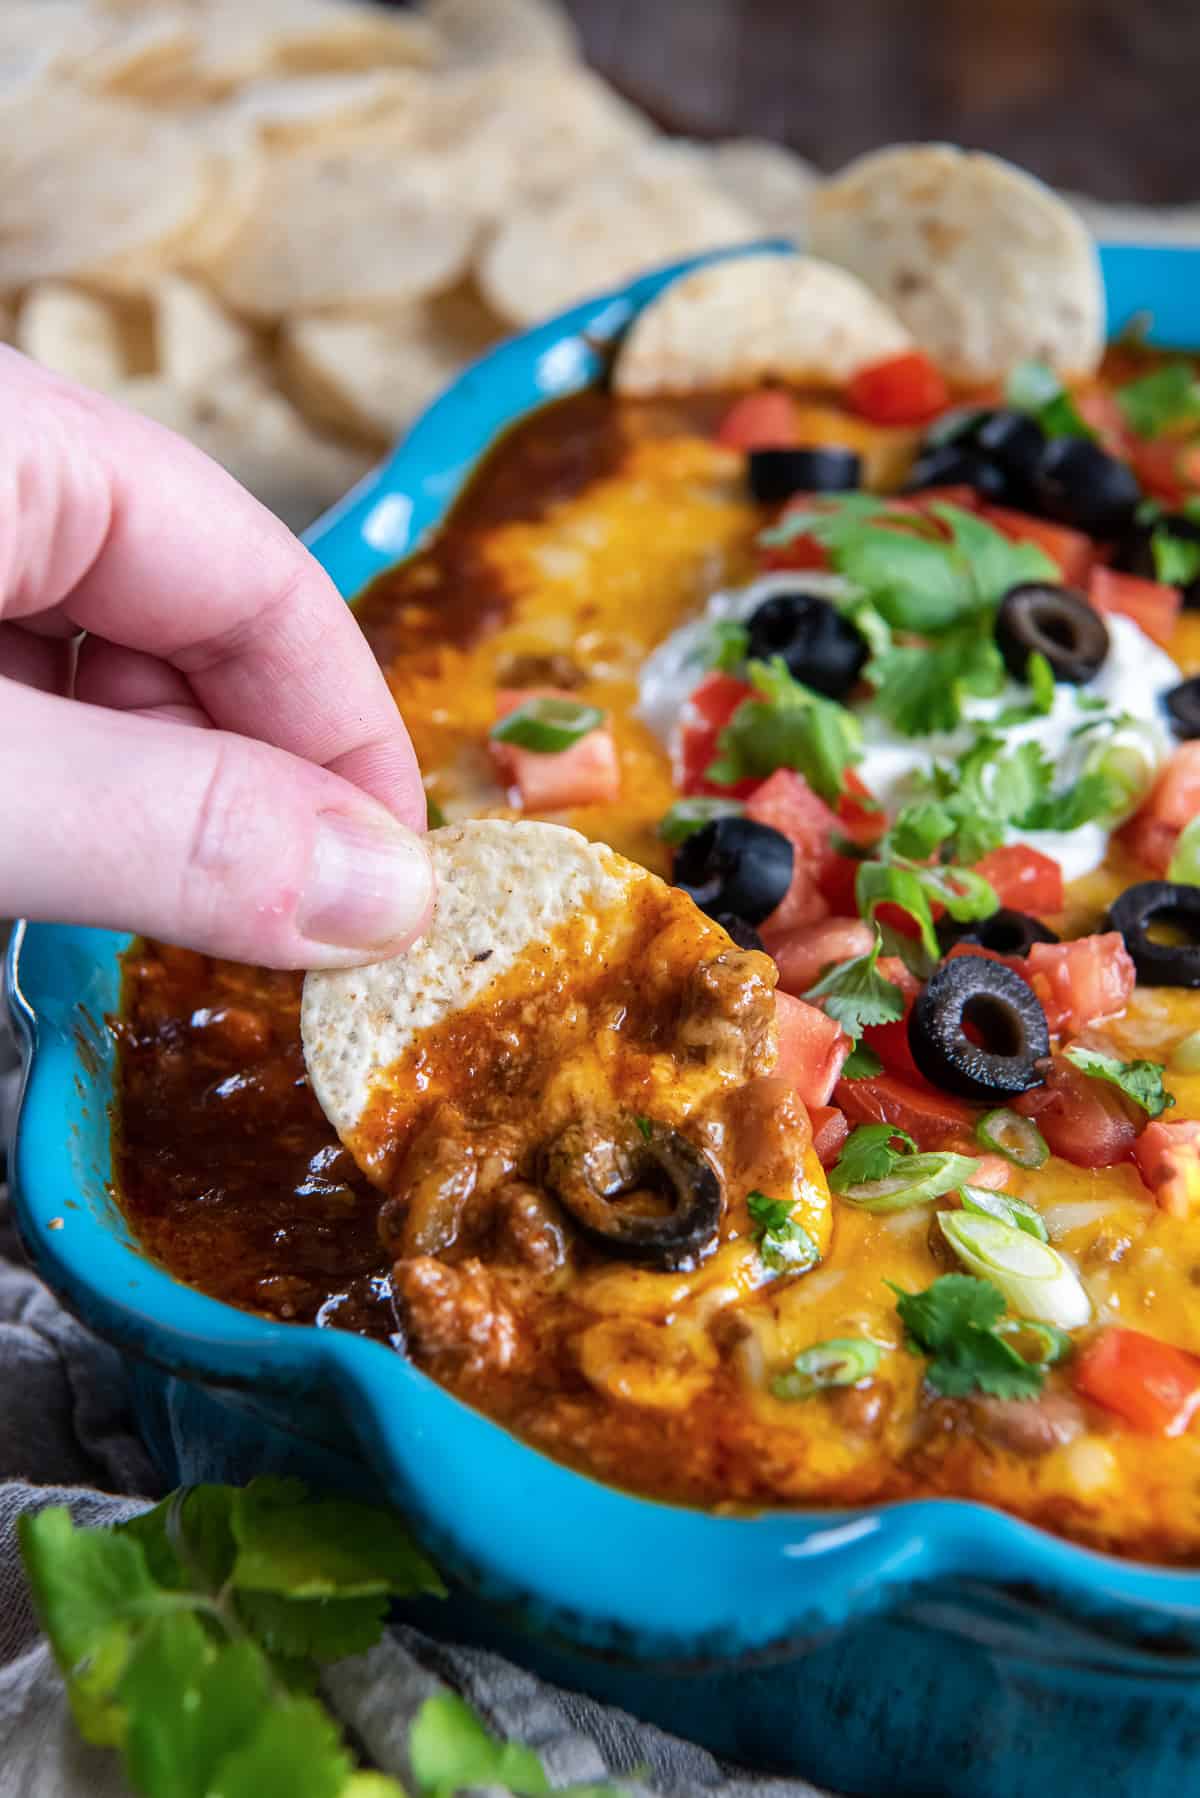 A hand dipping a tortilla chip into cheesy beef enchilada dip in a blue baking dish.